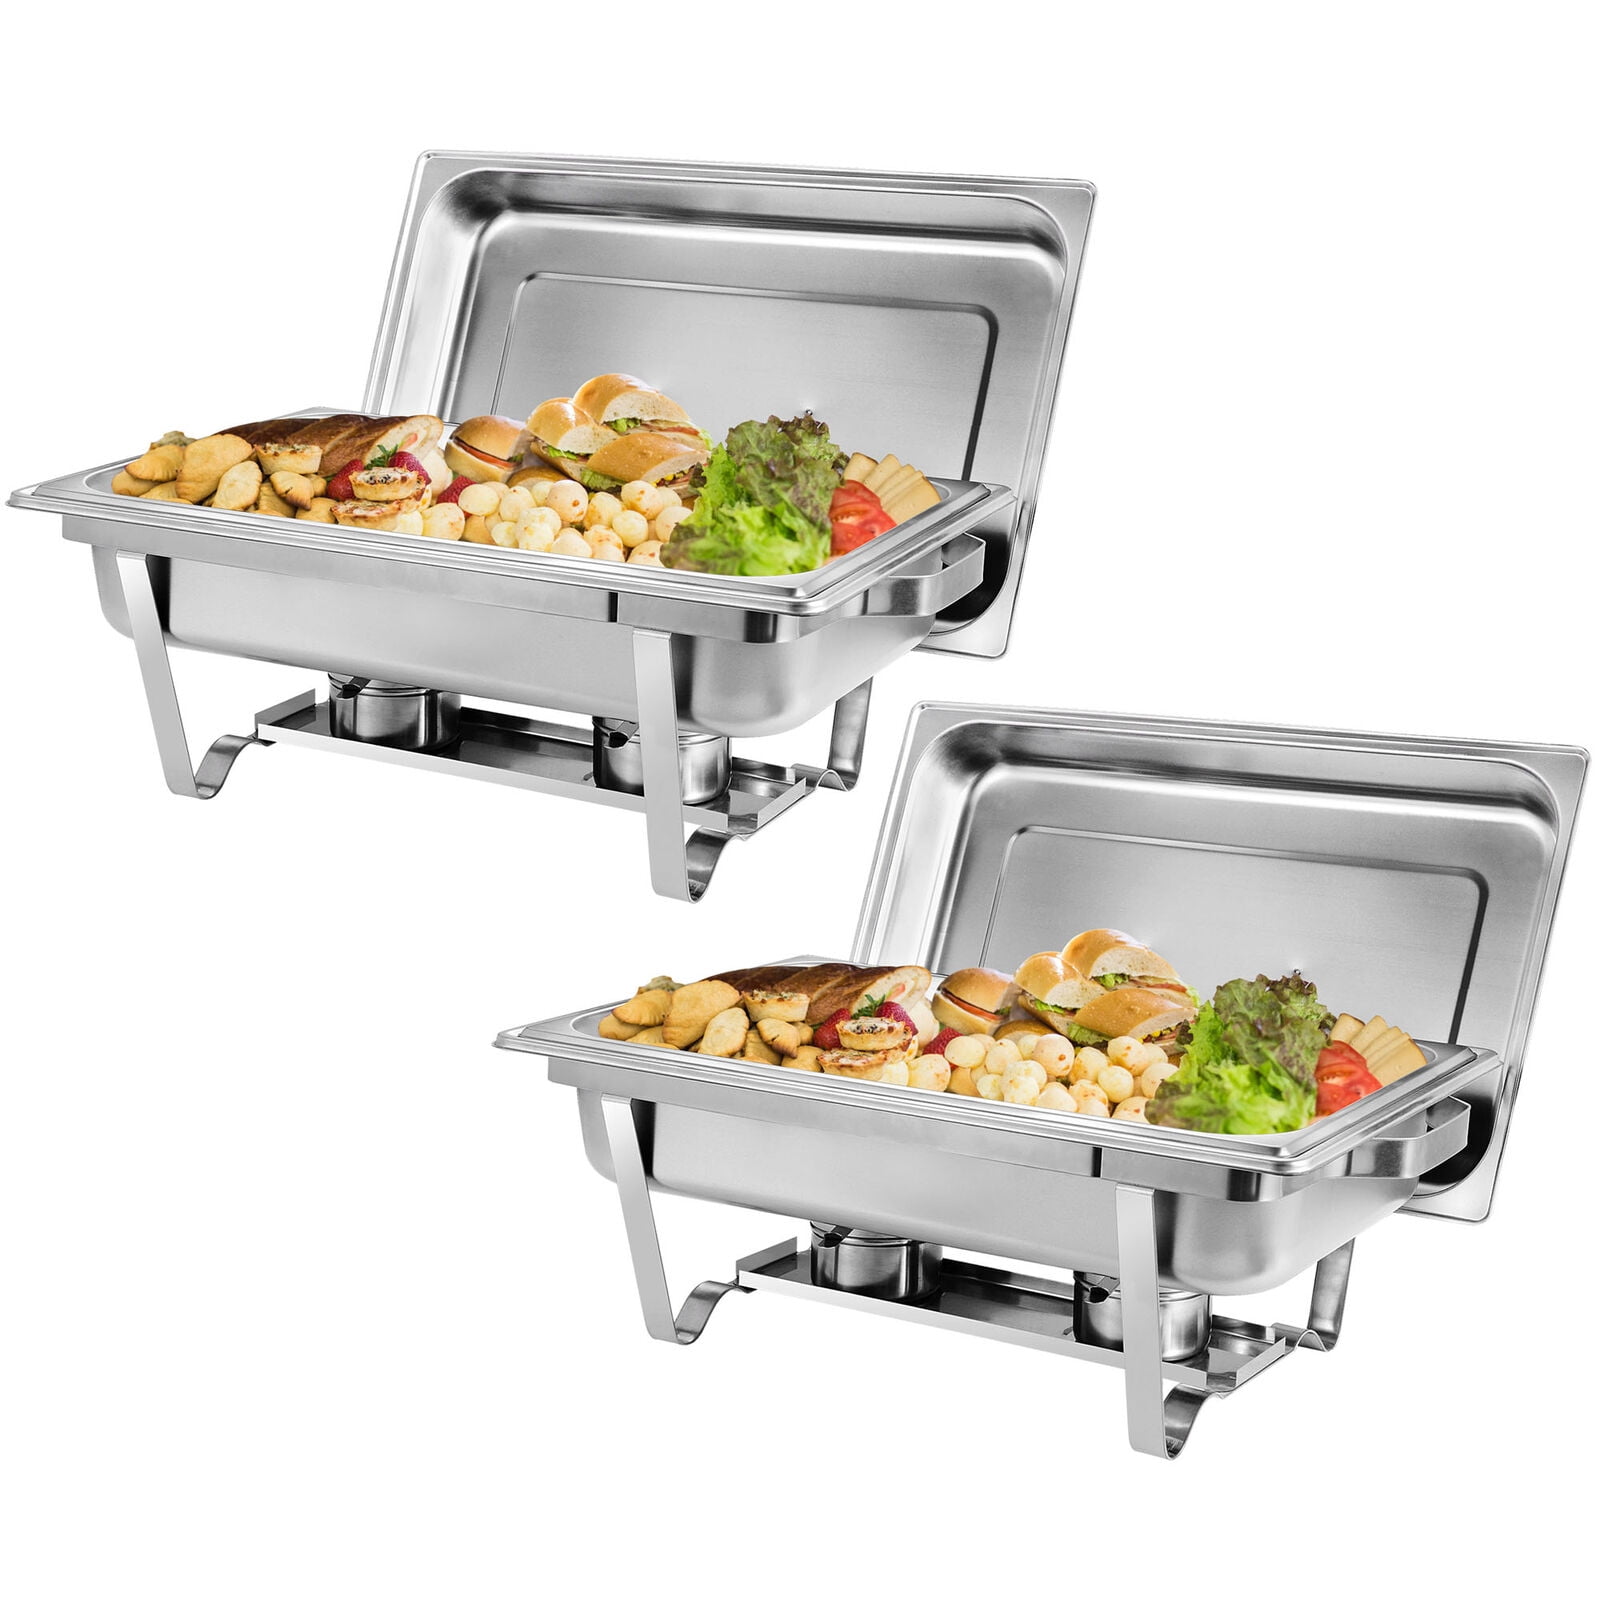 4 PACK Catering Classic STAINLESS STEEL Chafer Chafing Dish Set 8 QT Buffet Full 